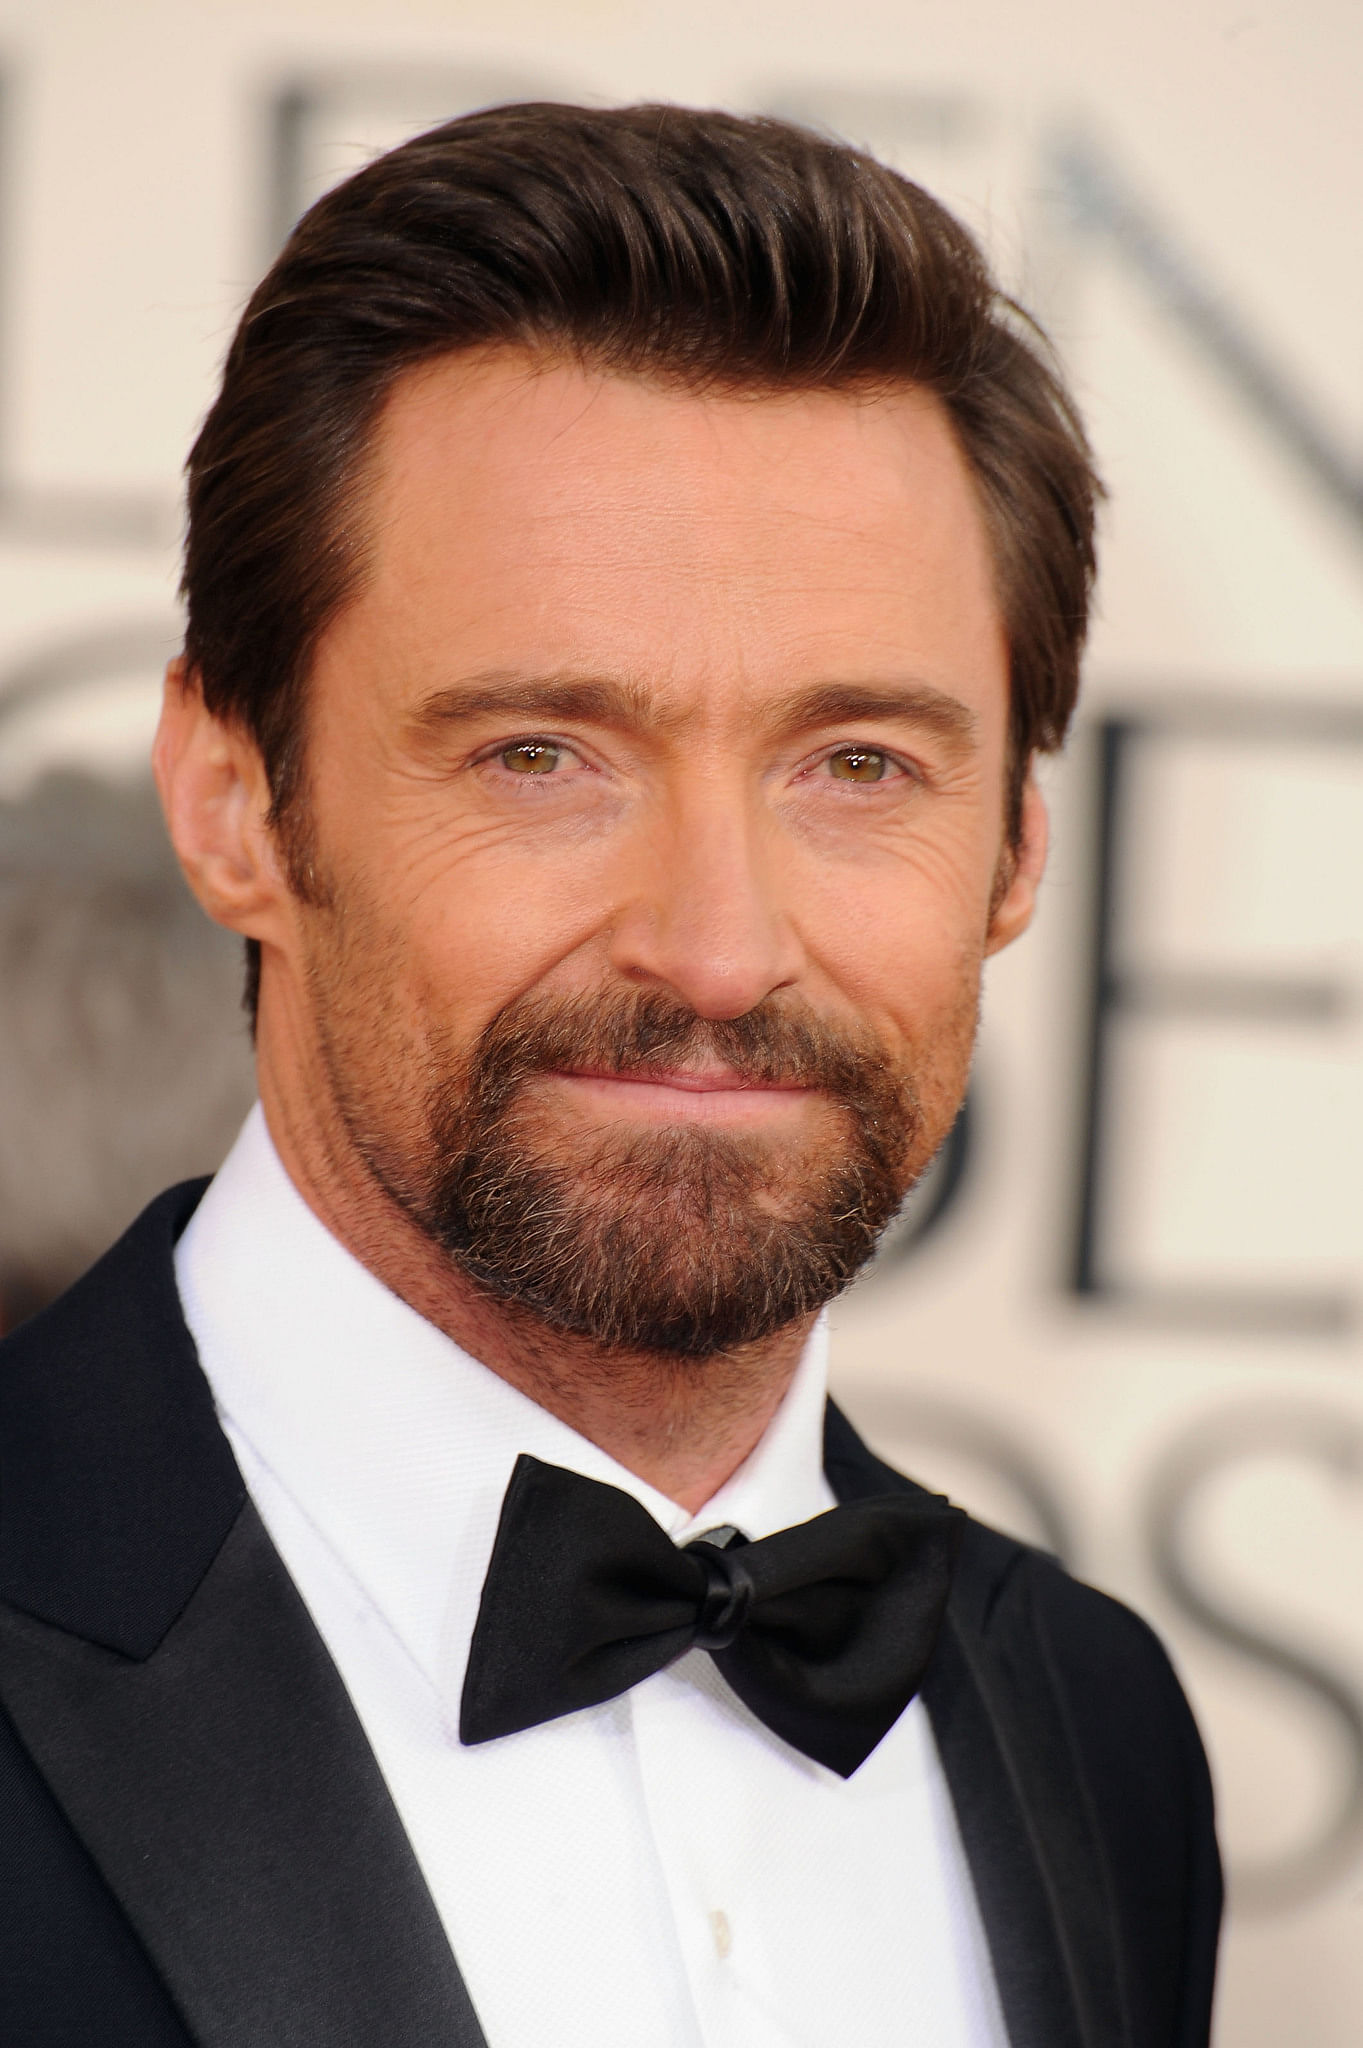 Hugh Jackman played Wolverine in the X-Men film series from 2000 to 2018. (Credit: IMDb)